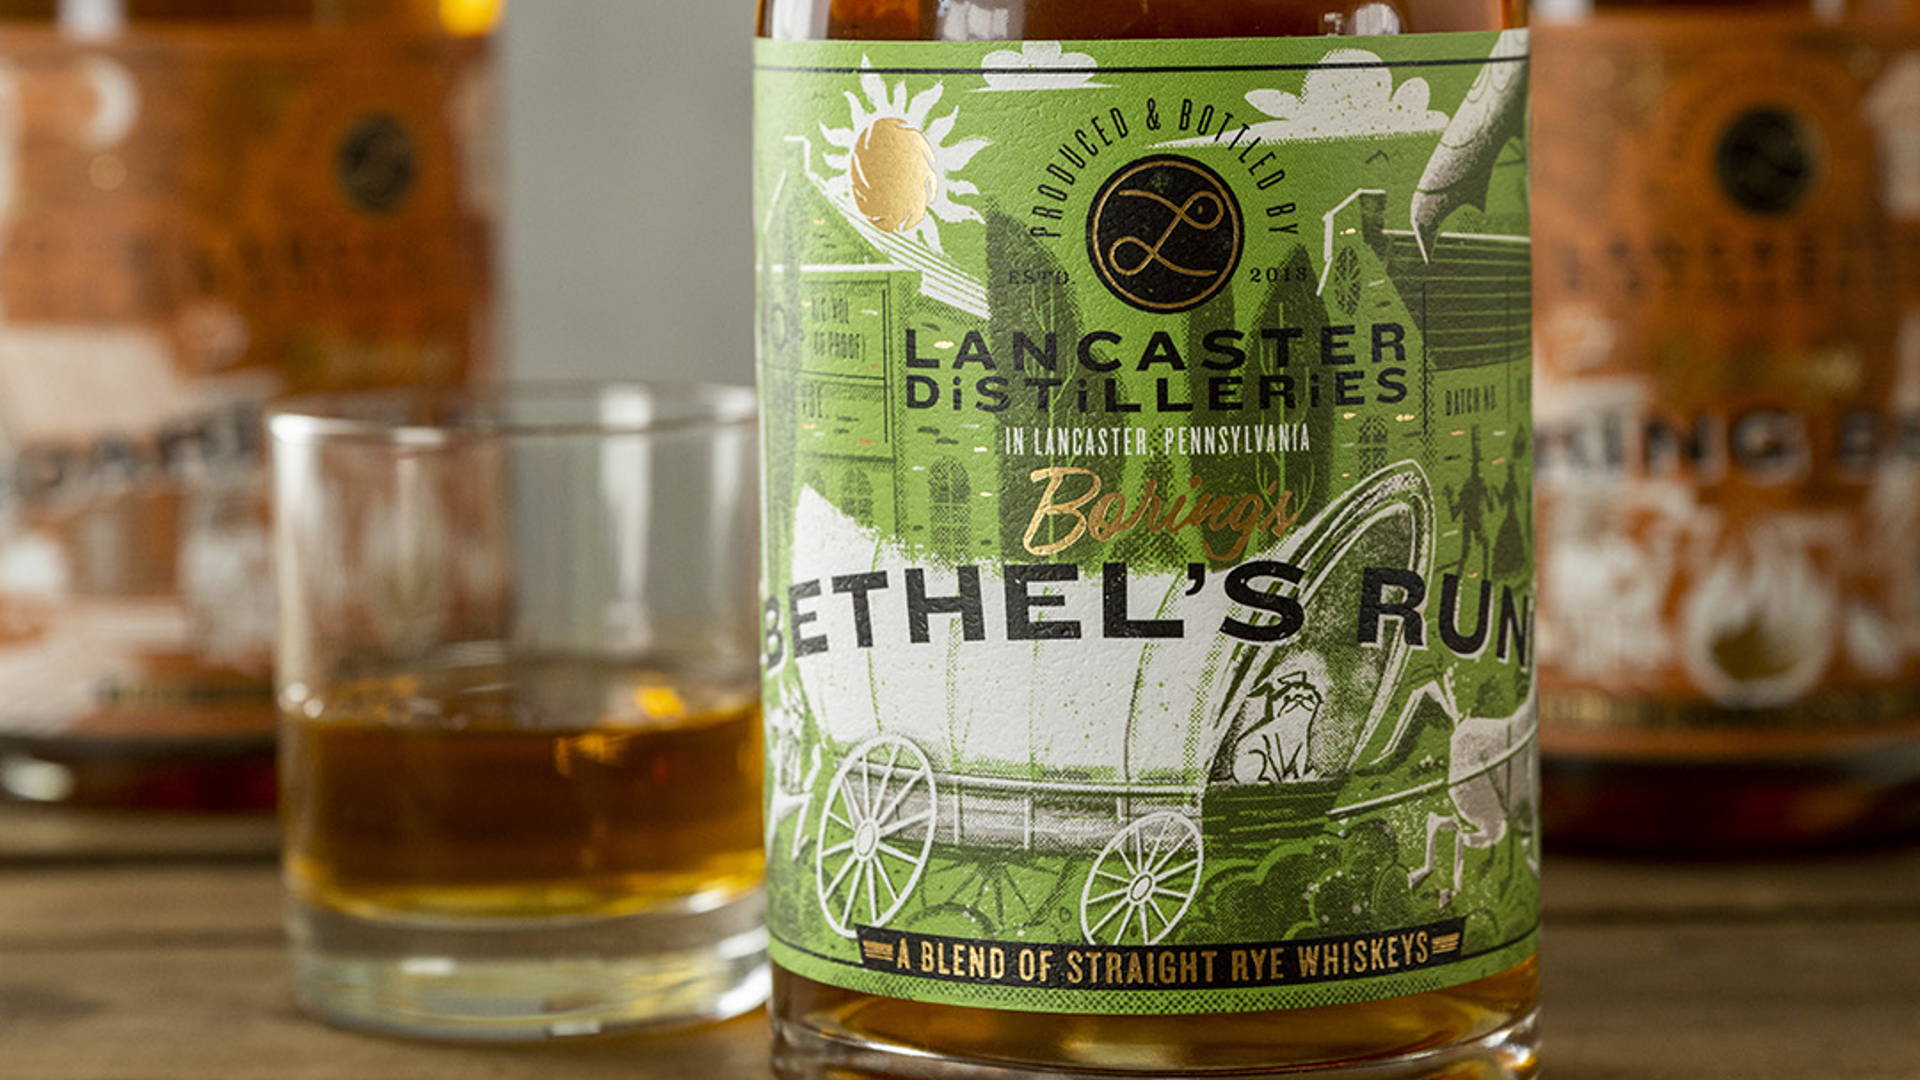 Featured image for Bethel's Creek Rye Whiskey Label Tells The Brand's Story